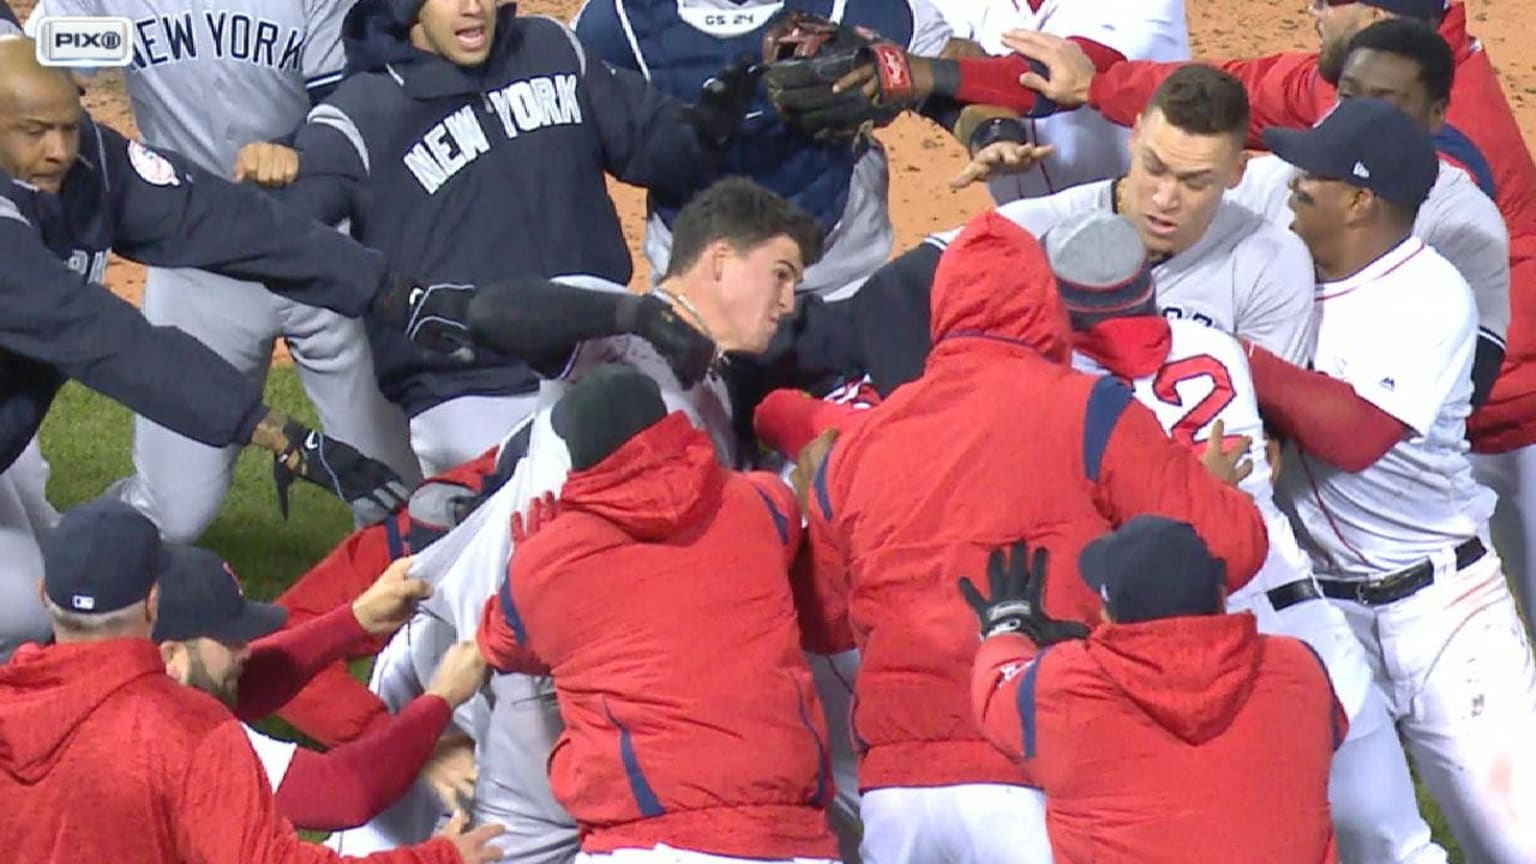 Yankees-Red Sox brawl for real after Tyler Austin gets plunked